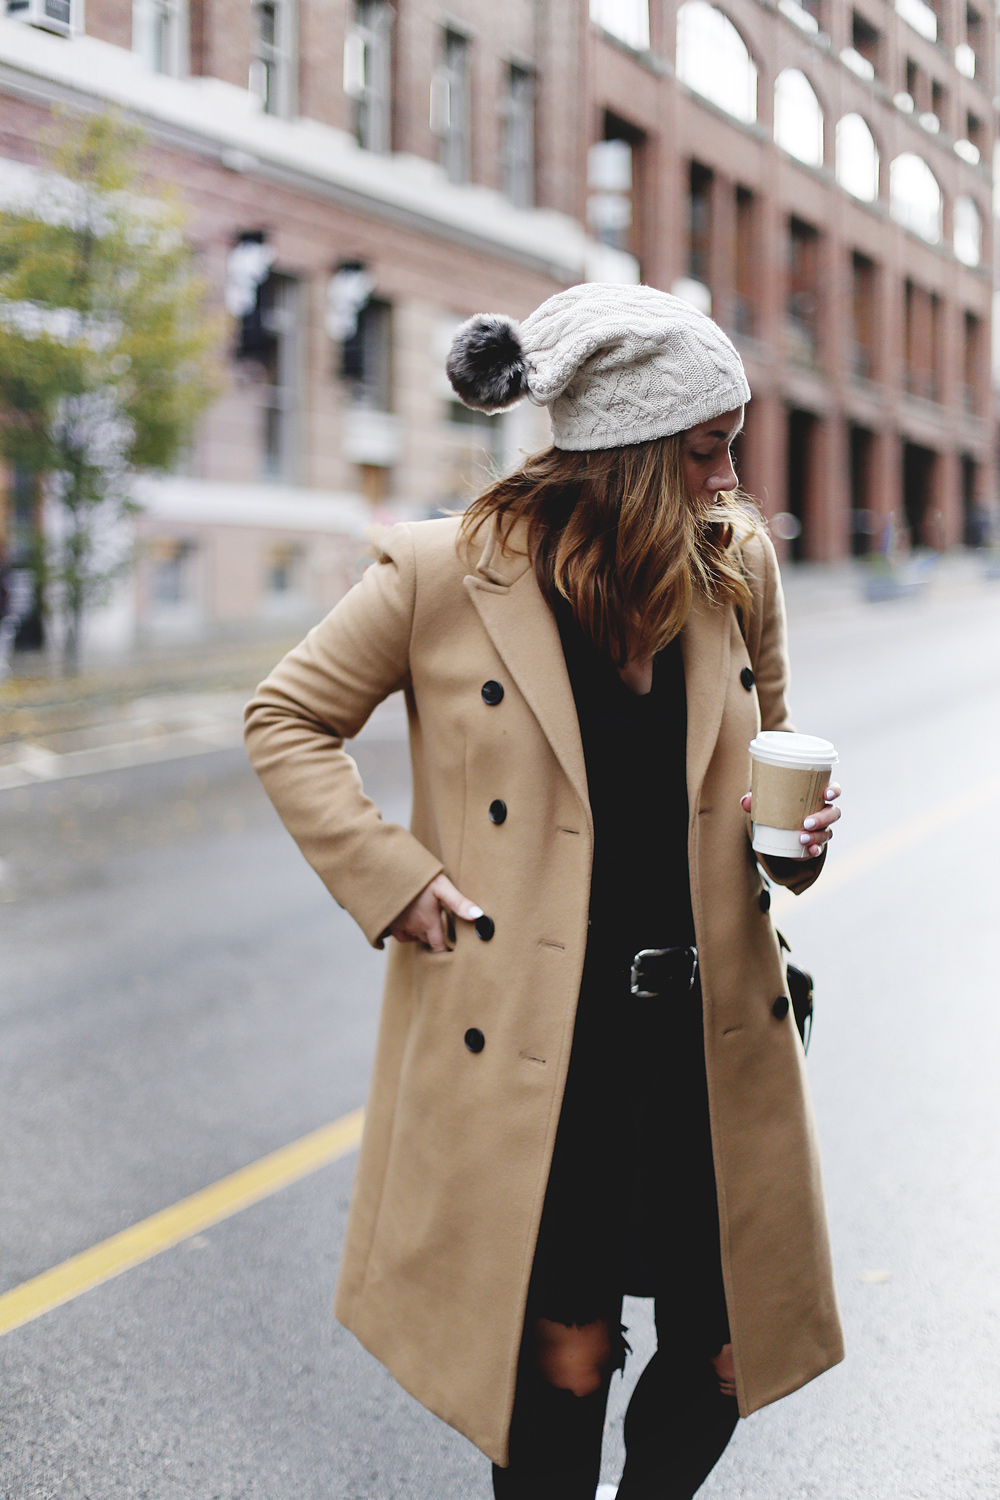 To Vogue or Bust shares ways to style your converse sneakers in white Converse All Stars, Aritzia camel coat, James Jeans black skinny jeans, Aritzia black leather bag and a Tilley Hats beanie